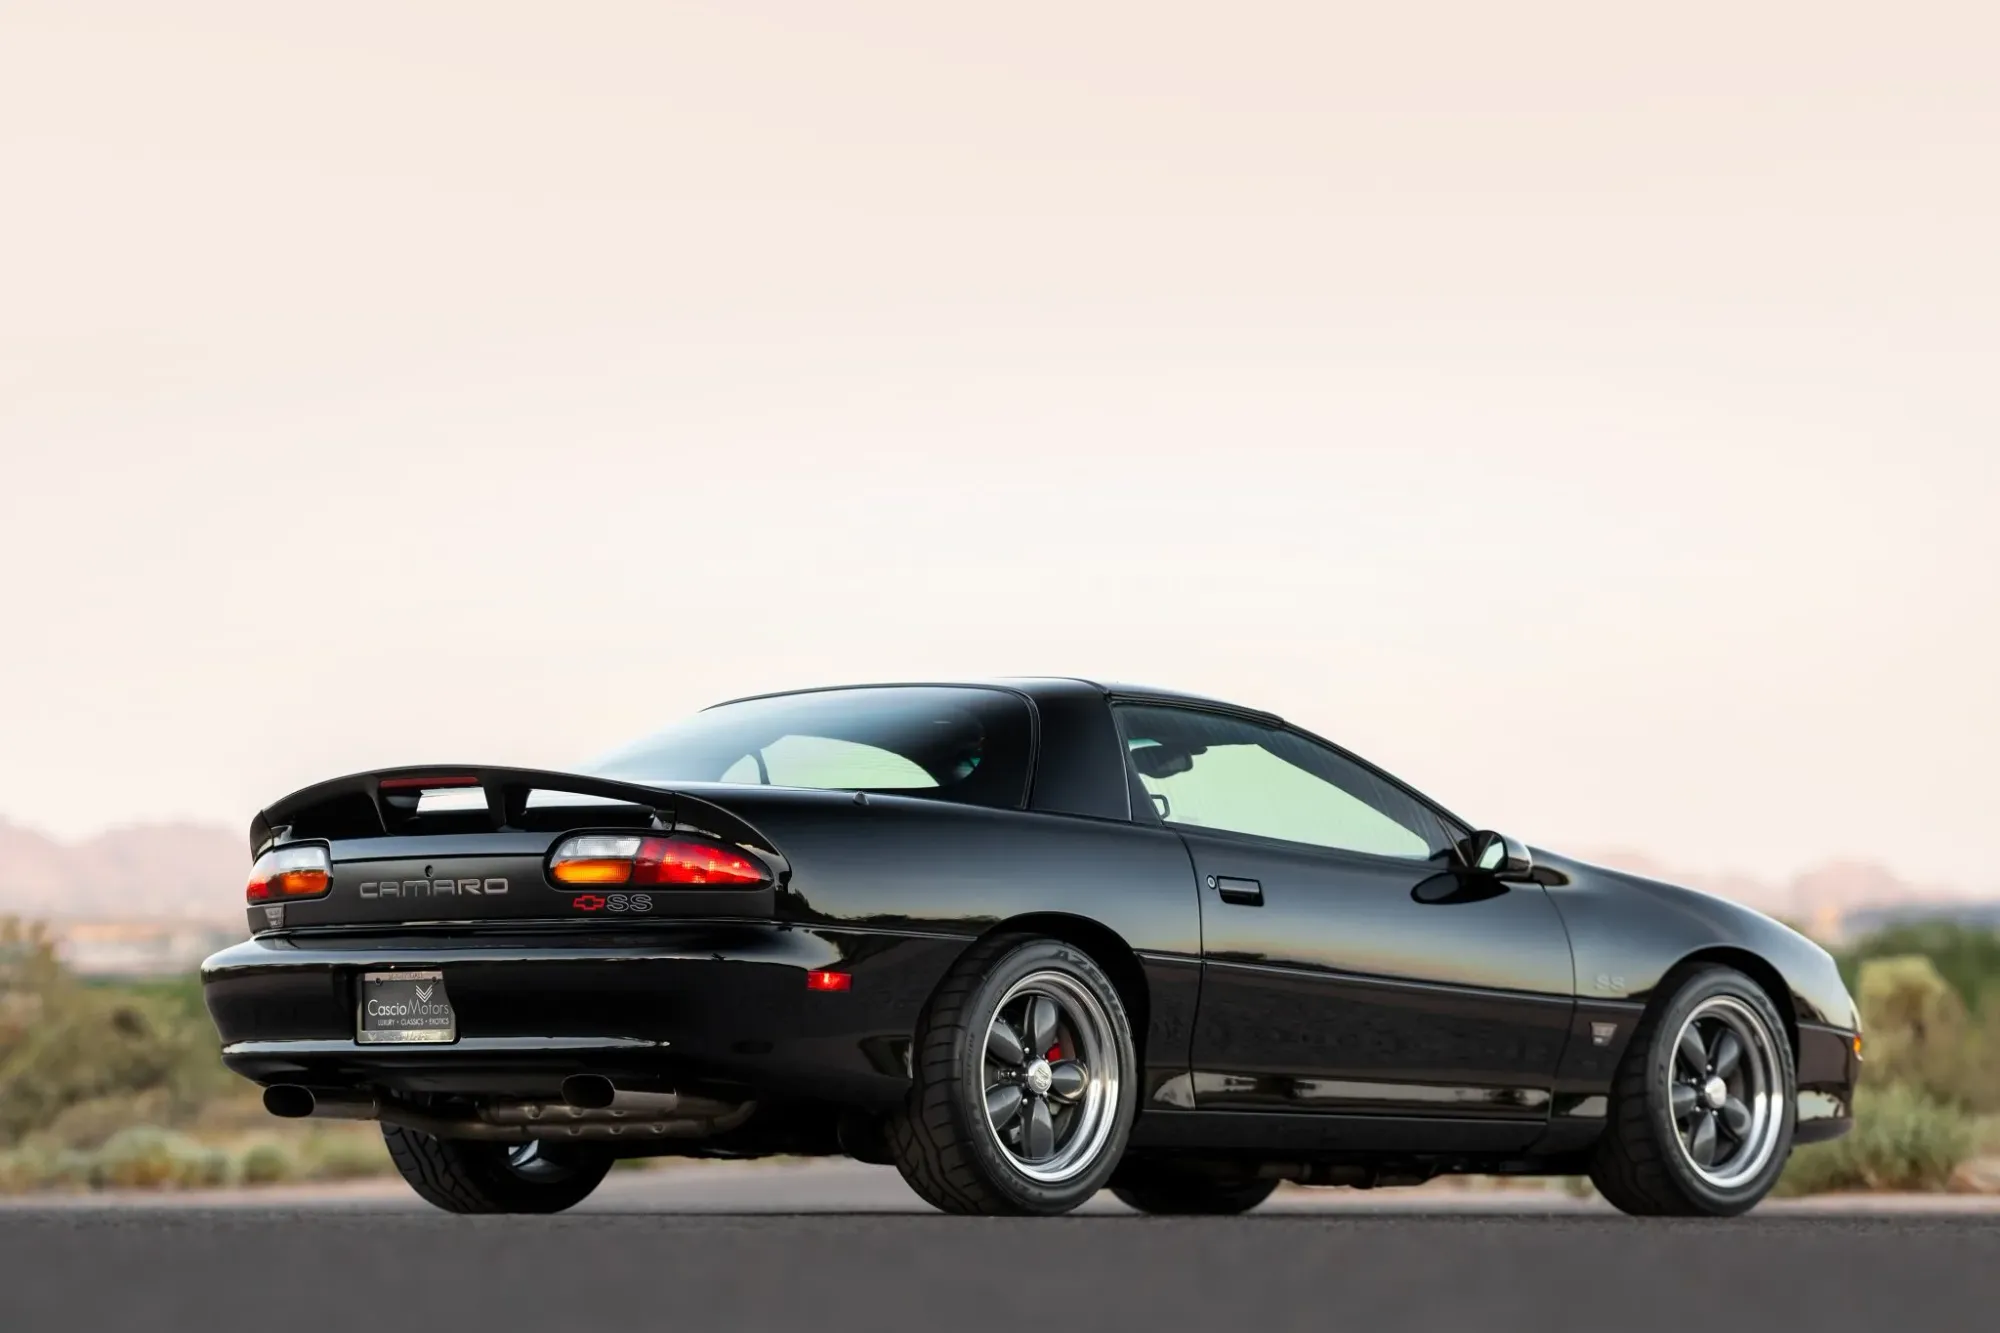 handpicked, muscle, american, news, newsletter, highlights, sports, client, classic, modern classic, europe, features, luxury, trucks, celebrity, off-road, german, cascio motors is selling nfl all-pro patrick petersen’s 2001 camaro intimidator ss at no reserve